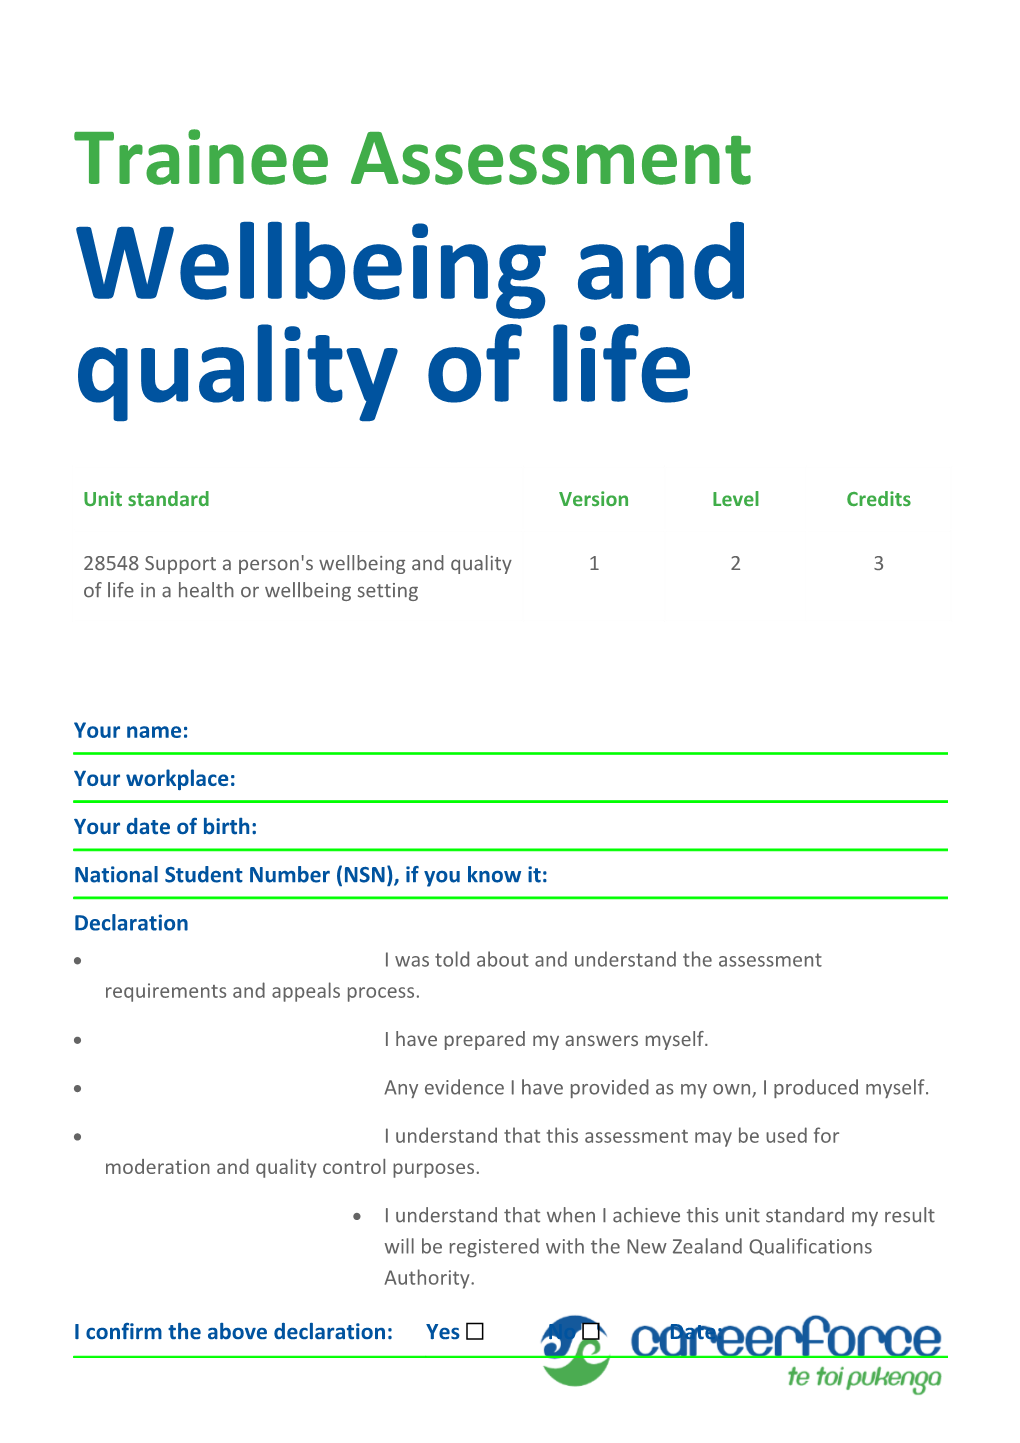 Wellbeing and Quality of Life